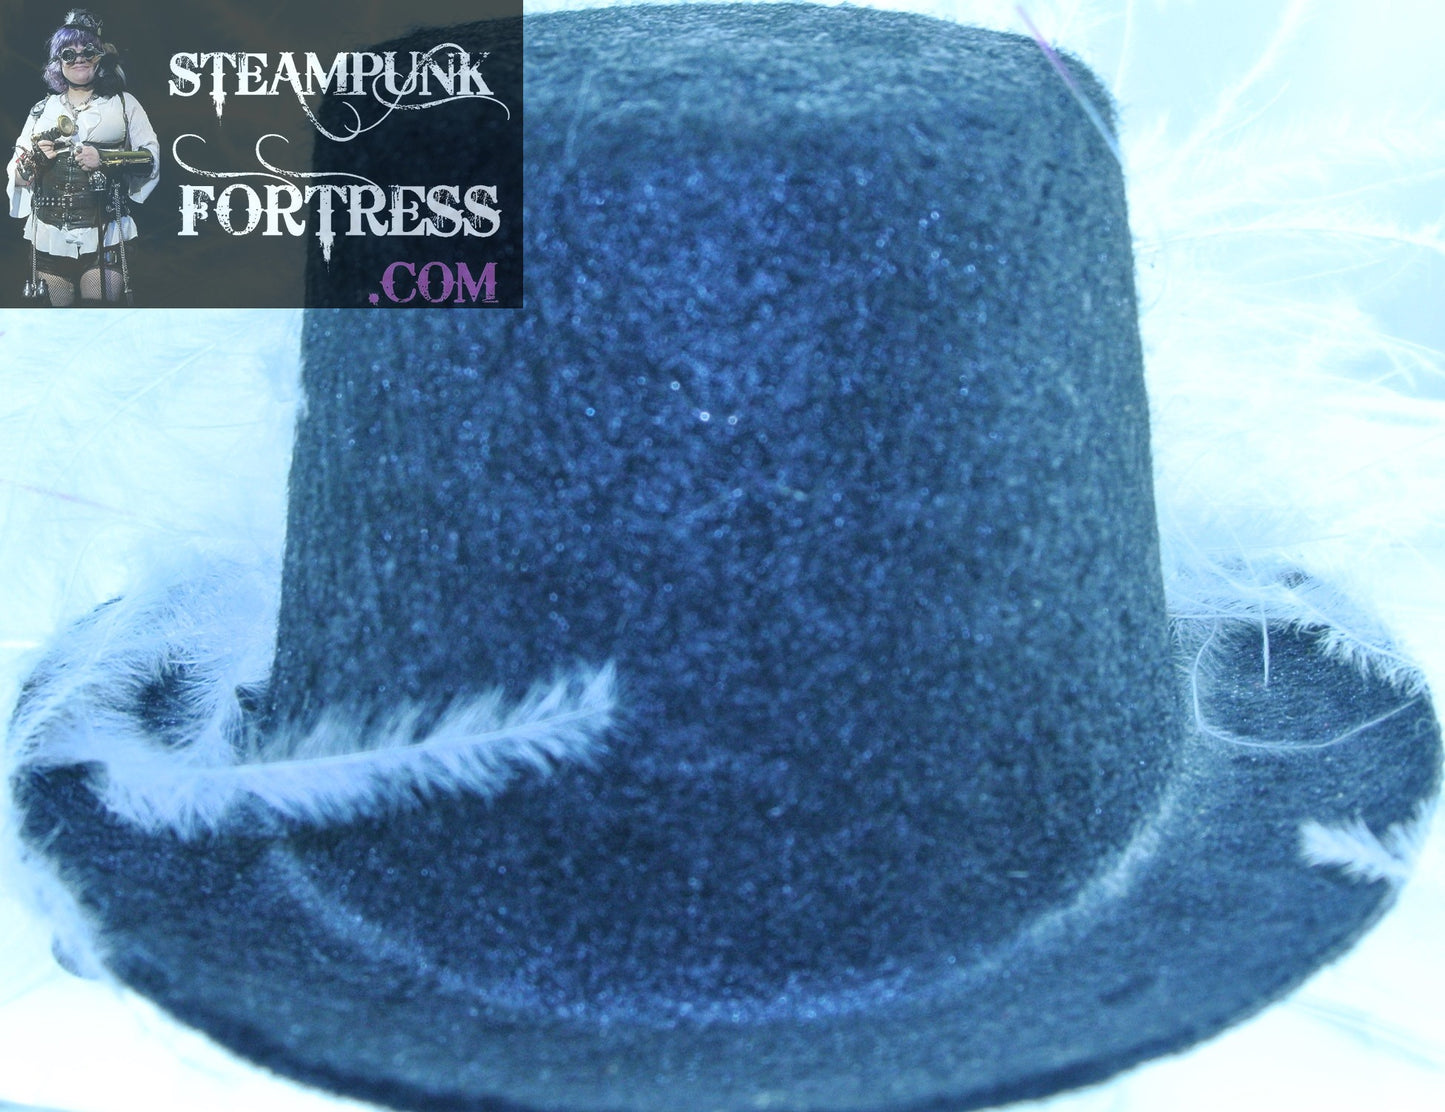 BLACK WHITE MARIBOU FEATHERS SHEER VEIL XS EXTRA SMALL MINI TOP HAT STARR WILDE STEAMPUNK FORTRESS